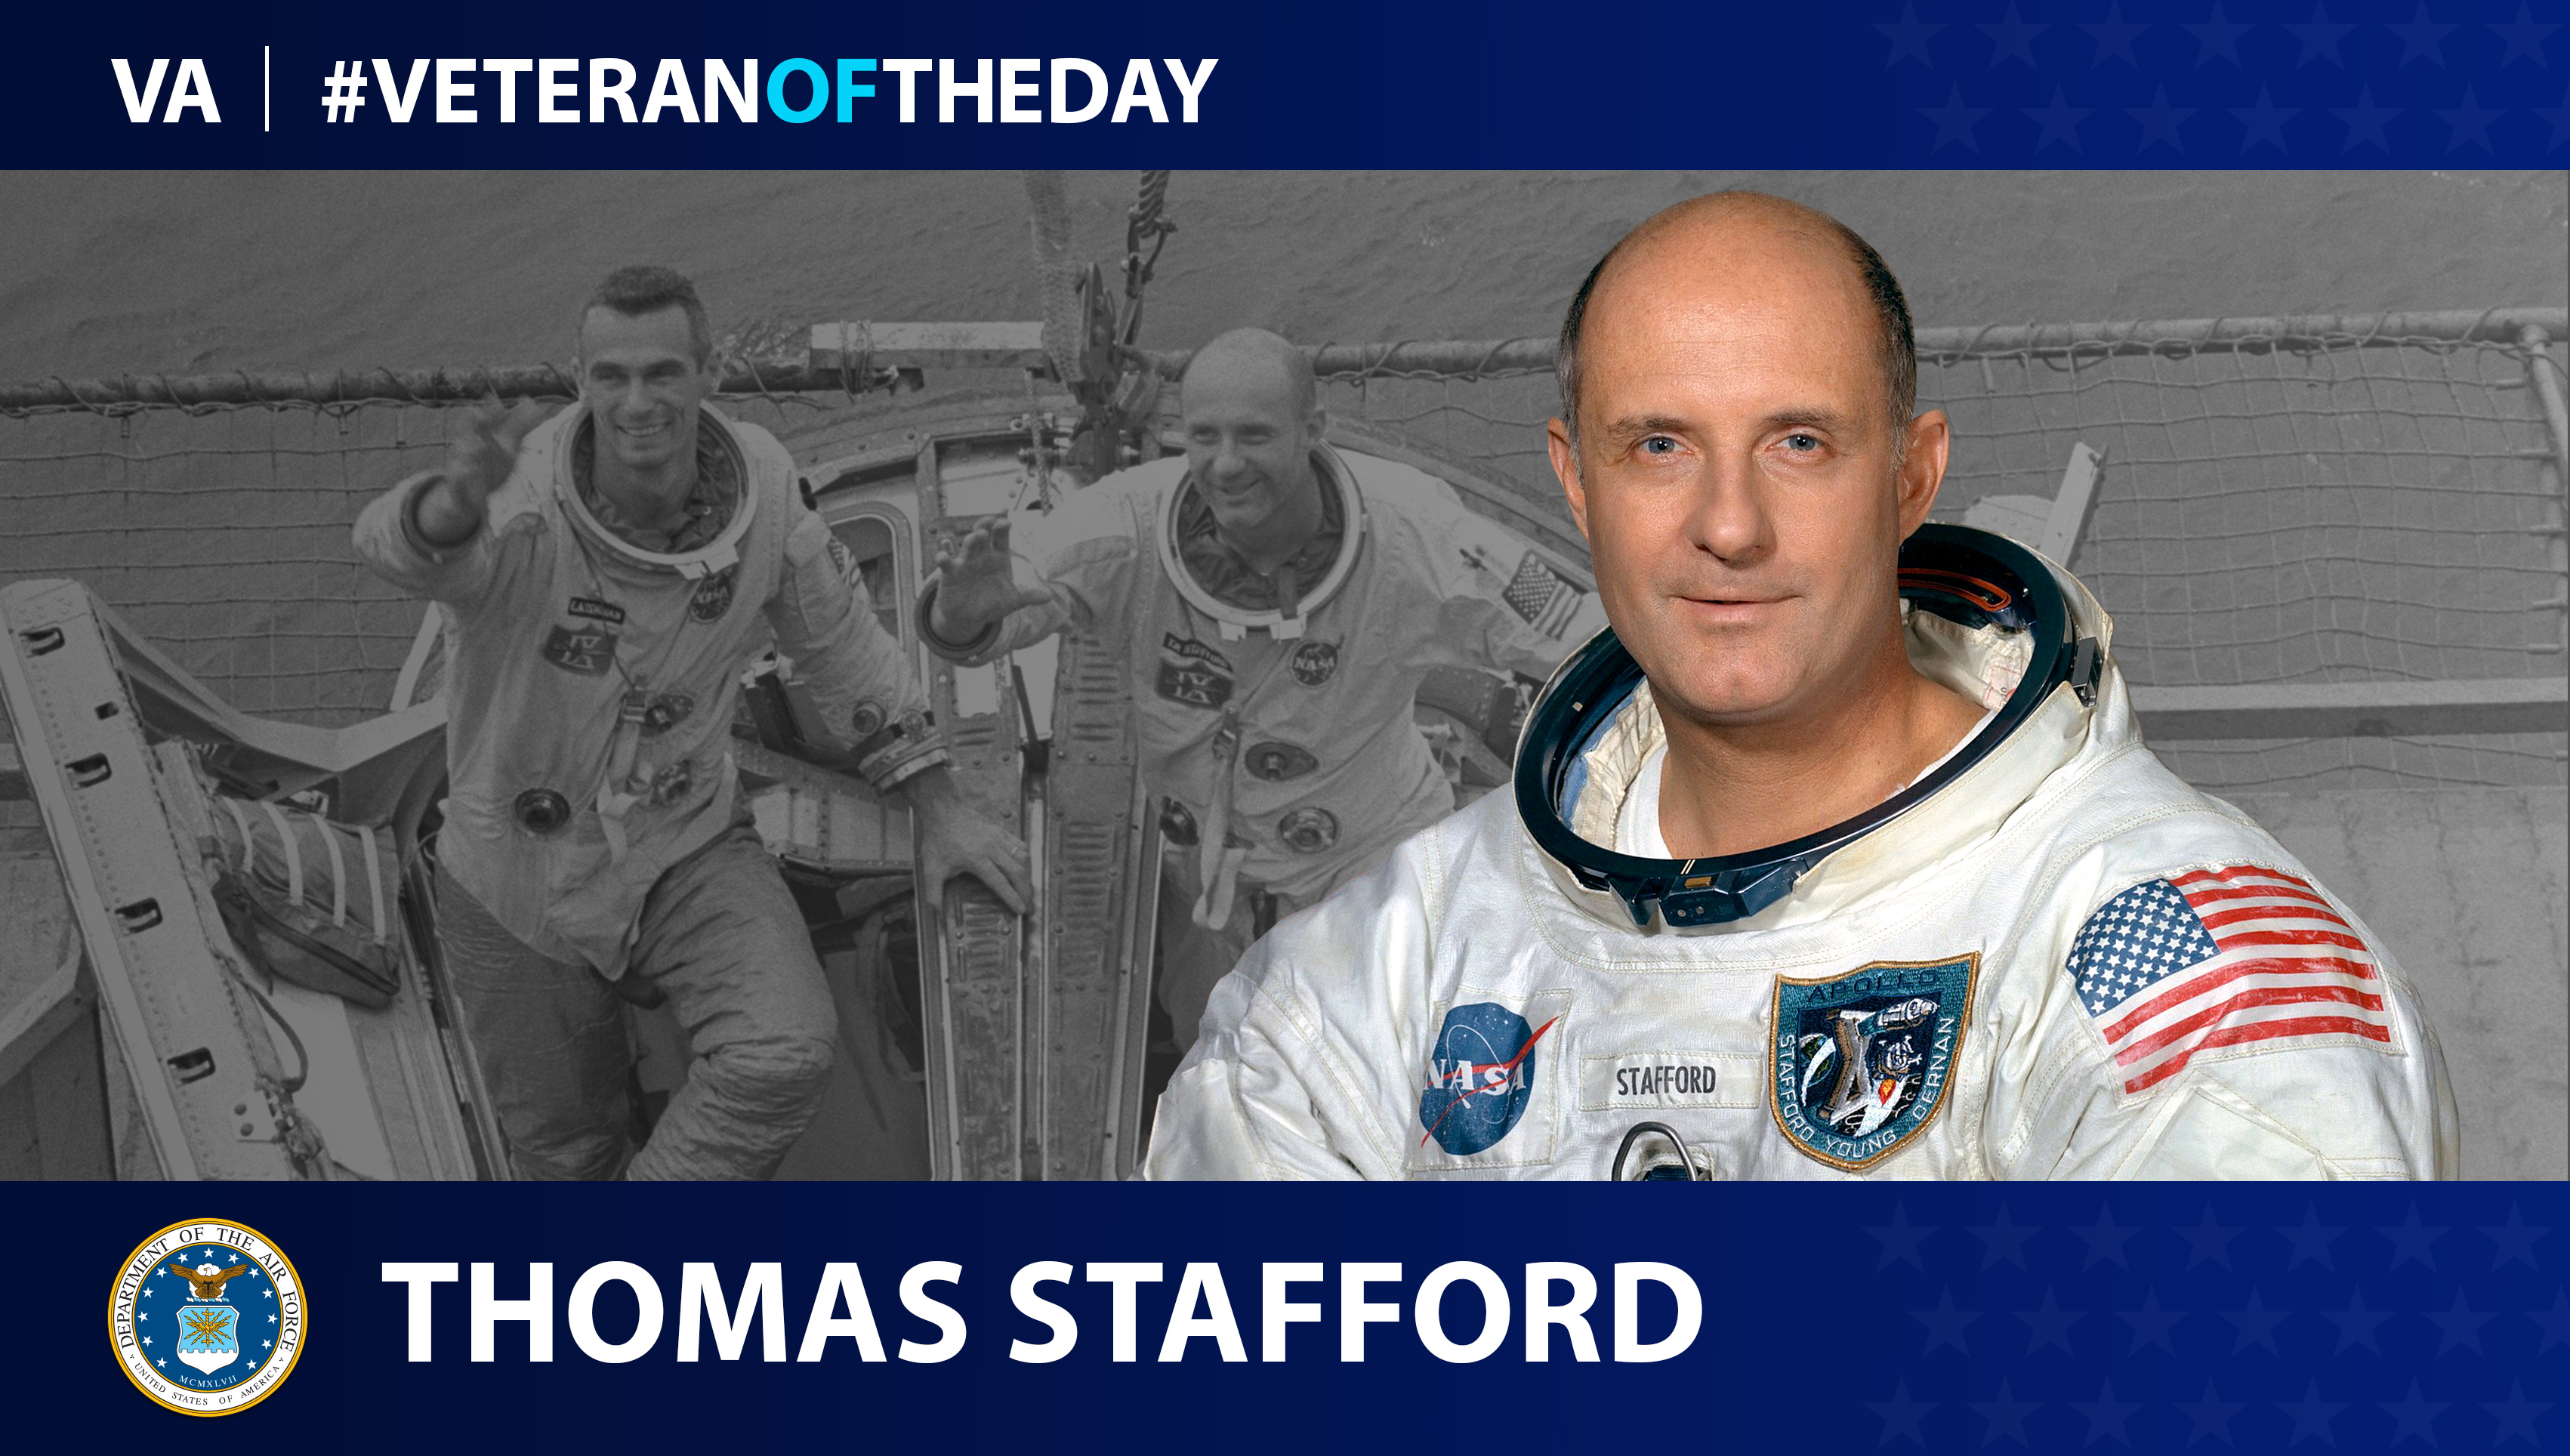 Air Force Veteran Thomas P. Stafford is today's Veteran of the Day.